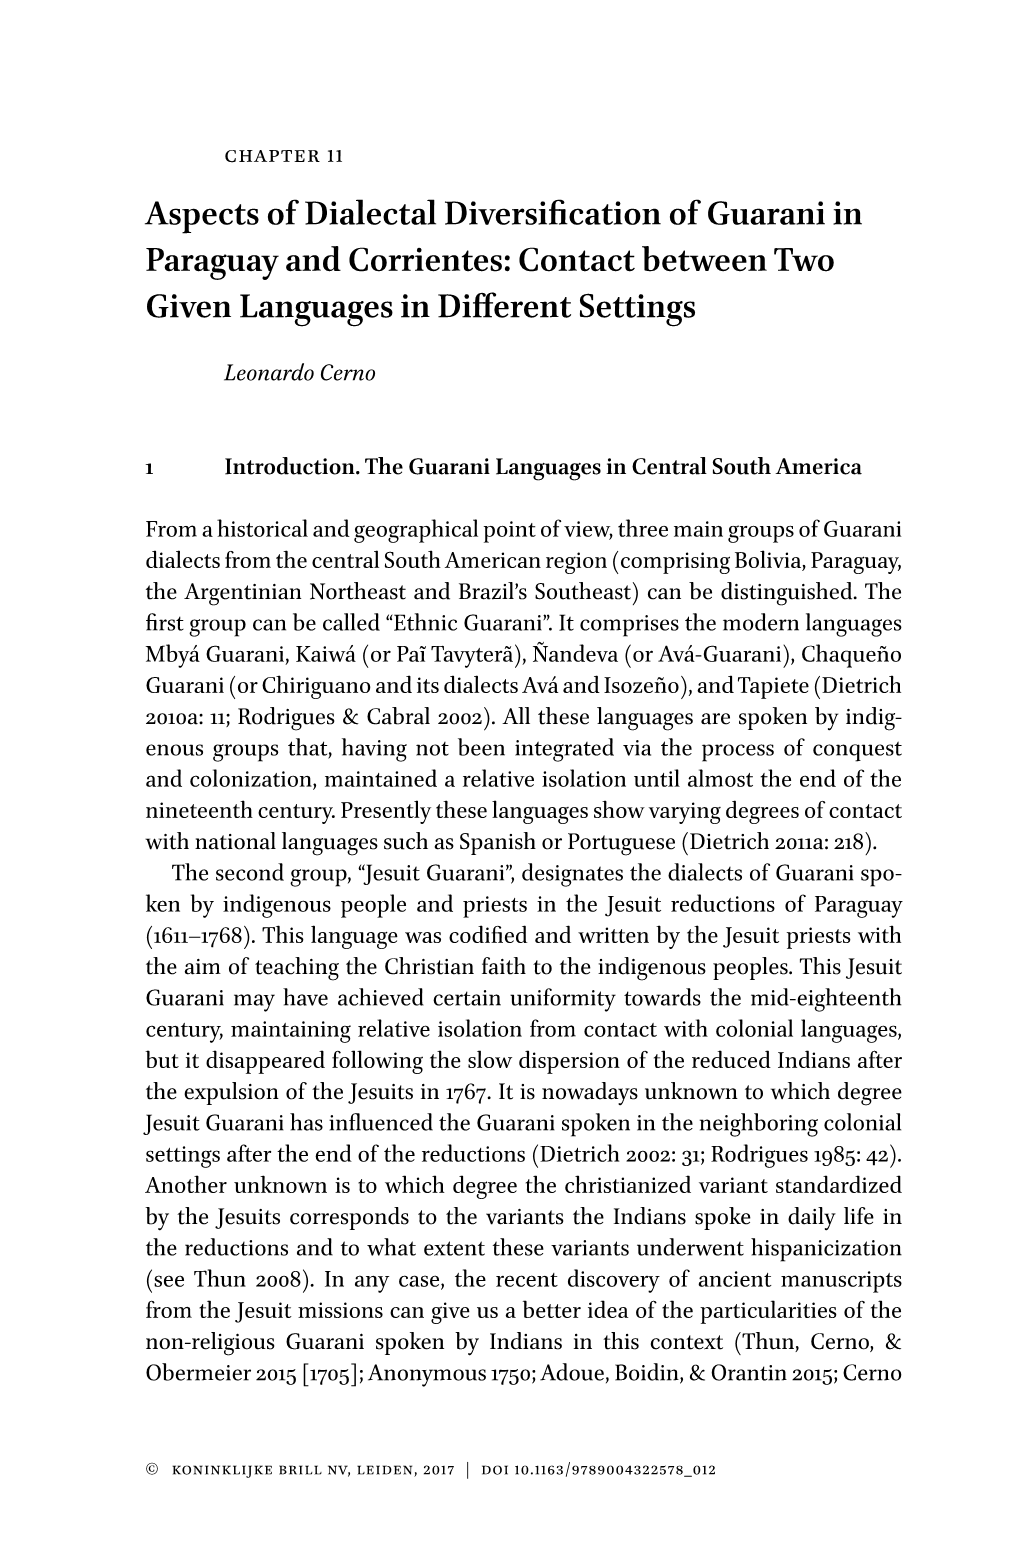 Aspects of Dialectal Diversification of Guarani in Paraguay and Corrientes: Contact Between Two Given Languages in Different Settings